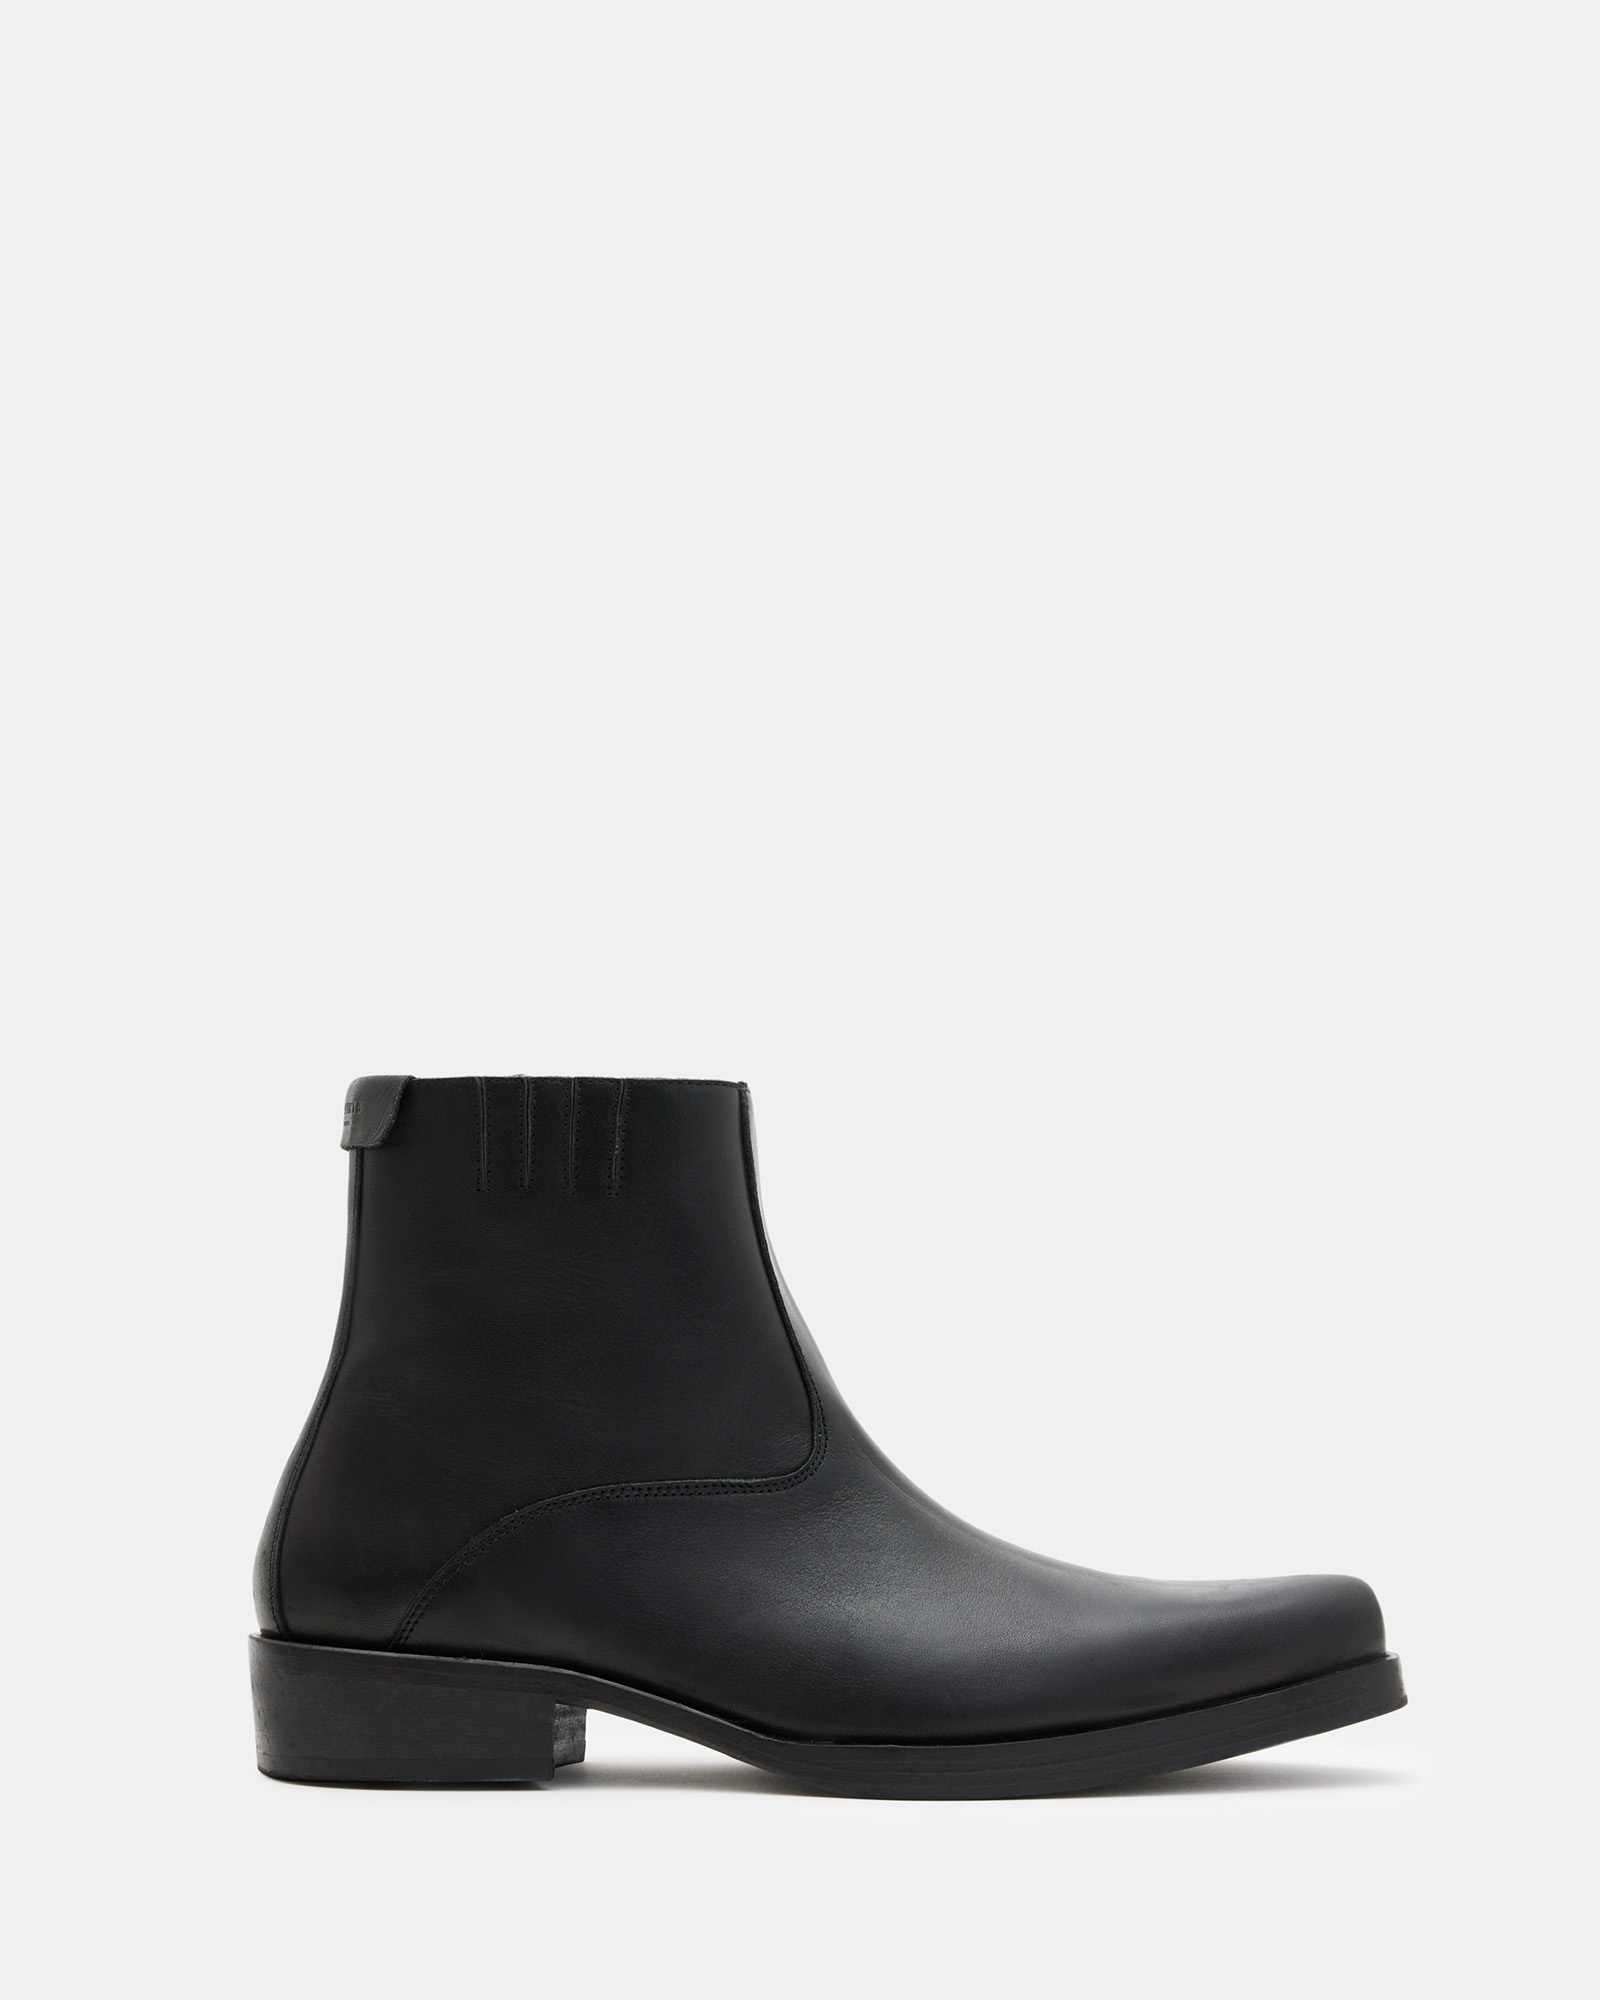 Allsaints Booker Leather Zip Up Boots In Black